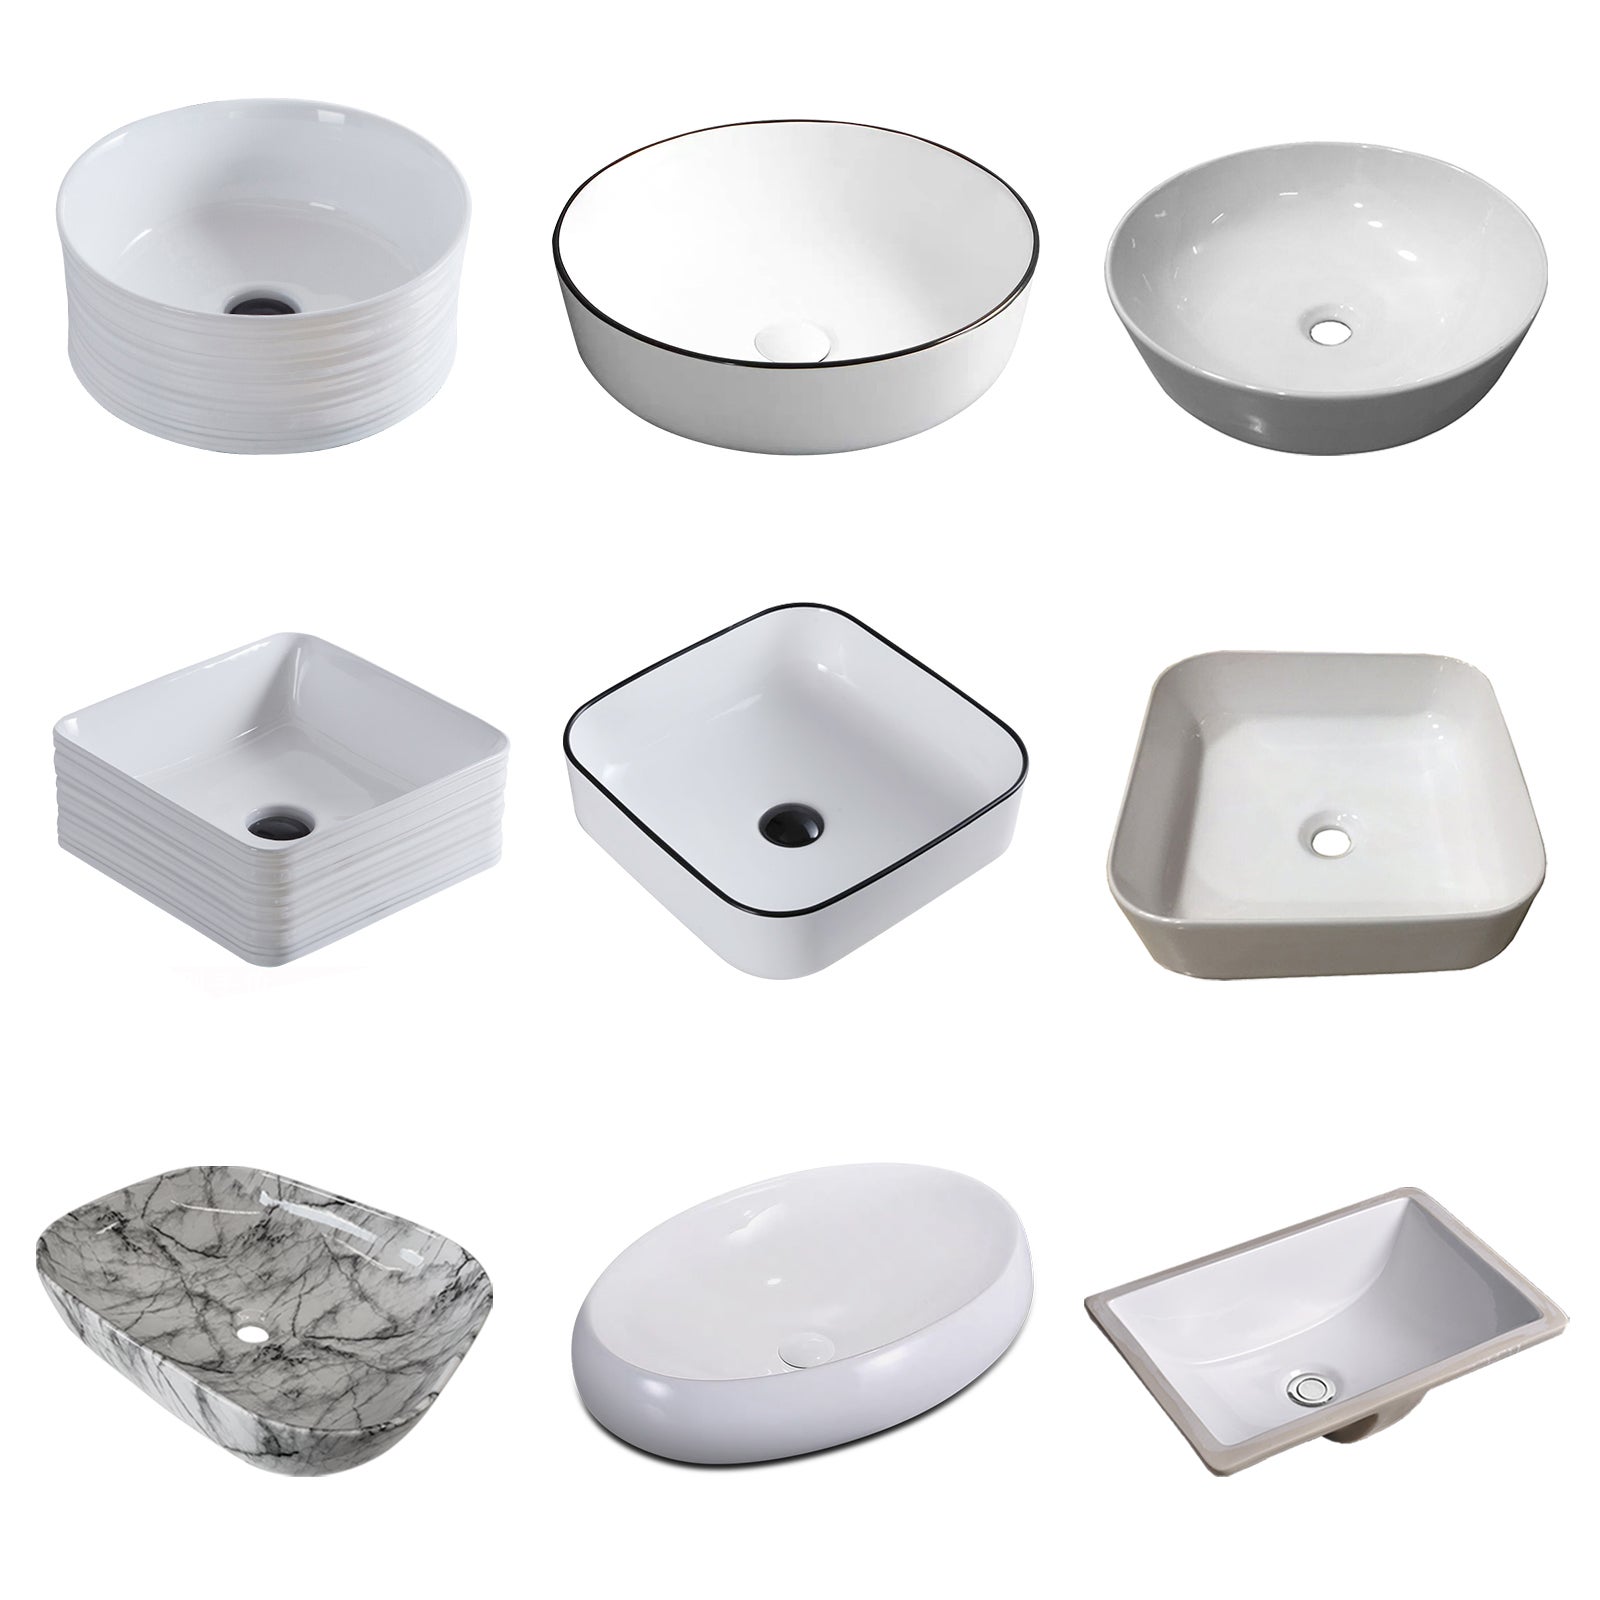 ACA Bathroom Ceramic Basin Sink Bowl Oval Square Round Above Counter Top High Grossy White